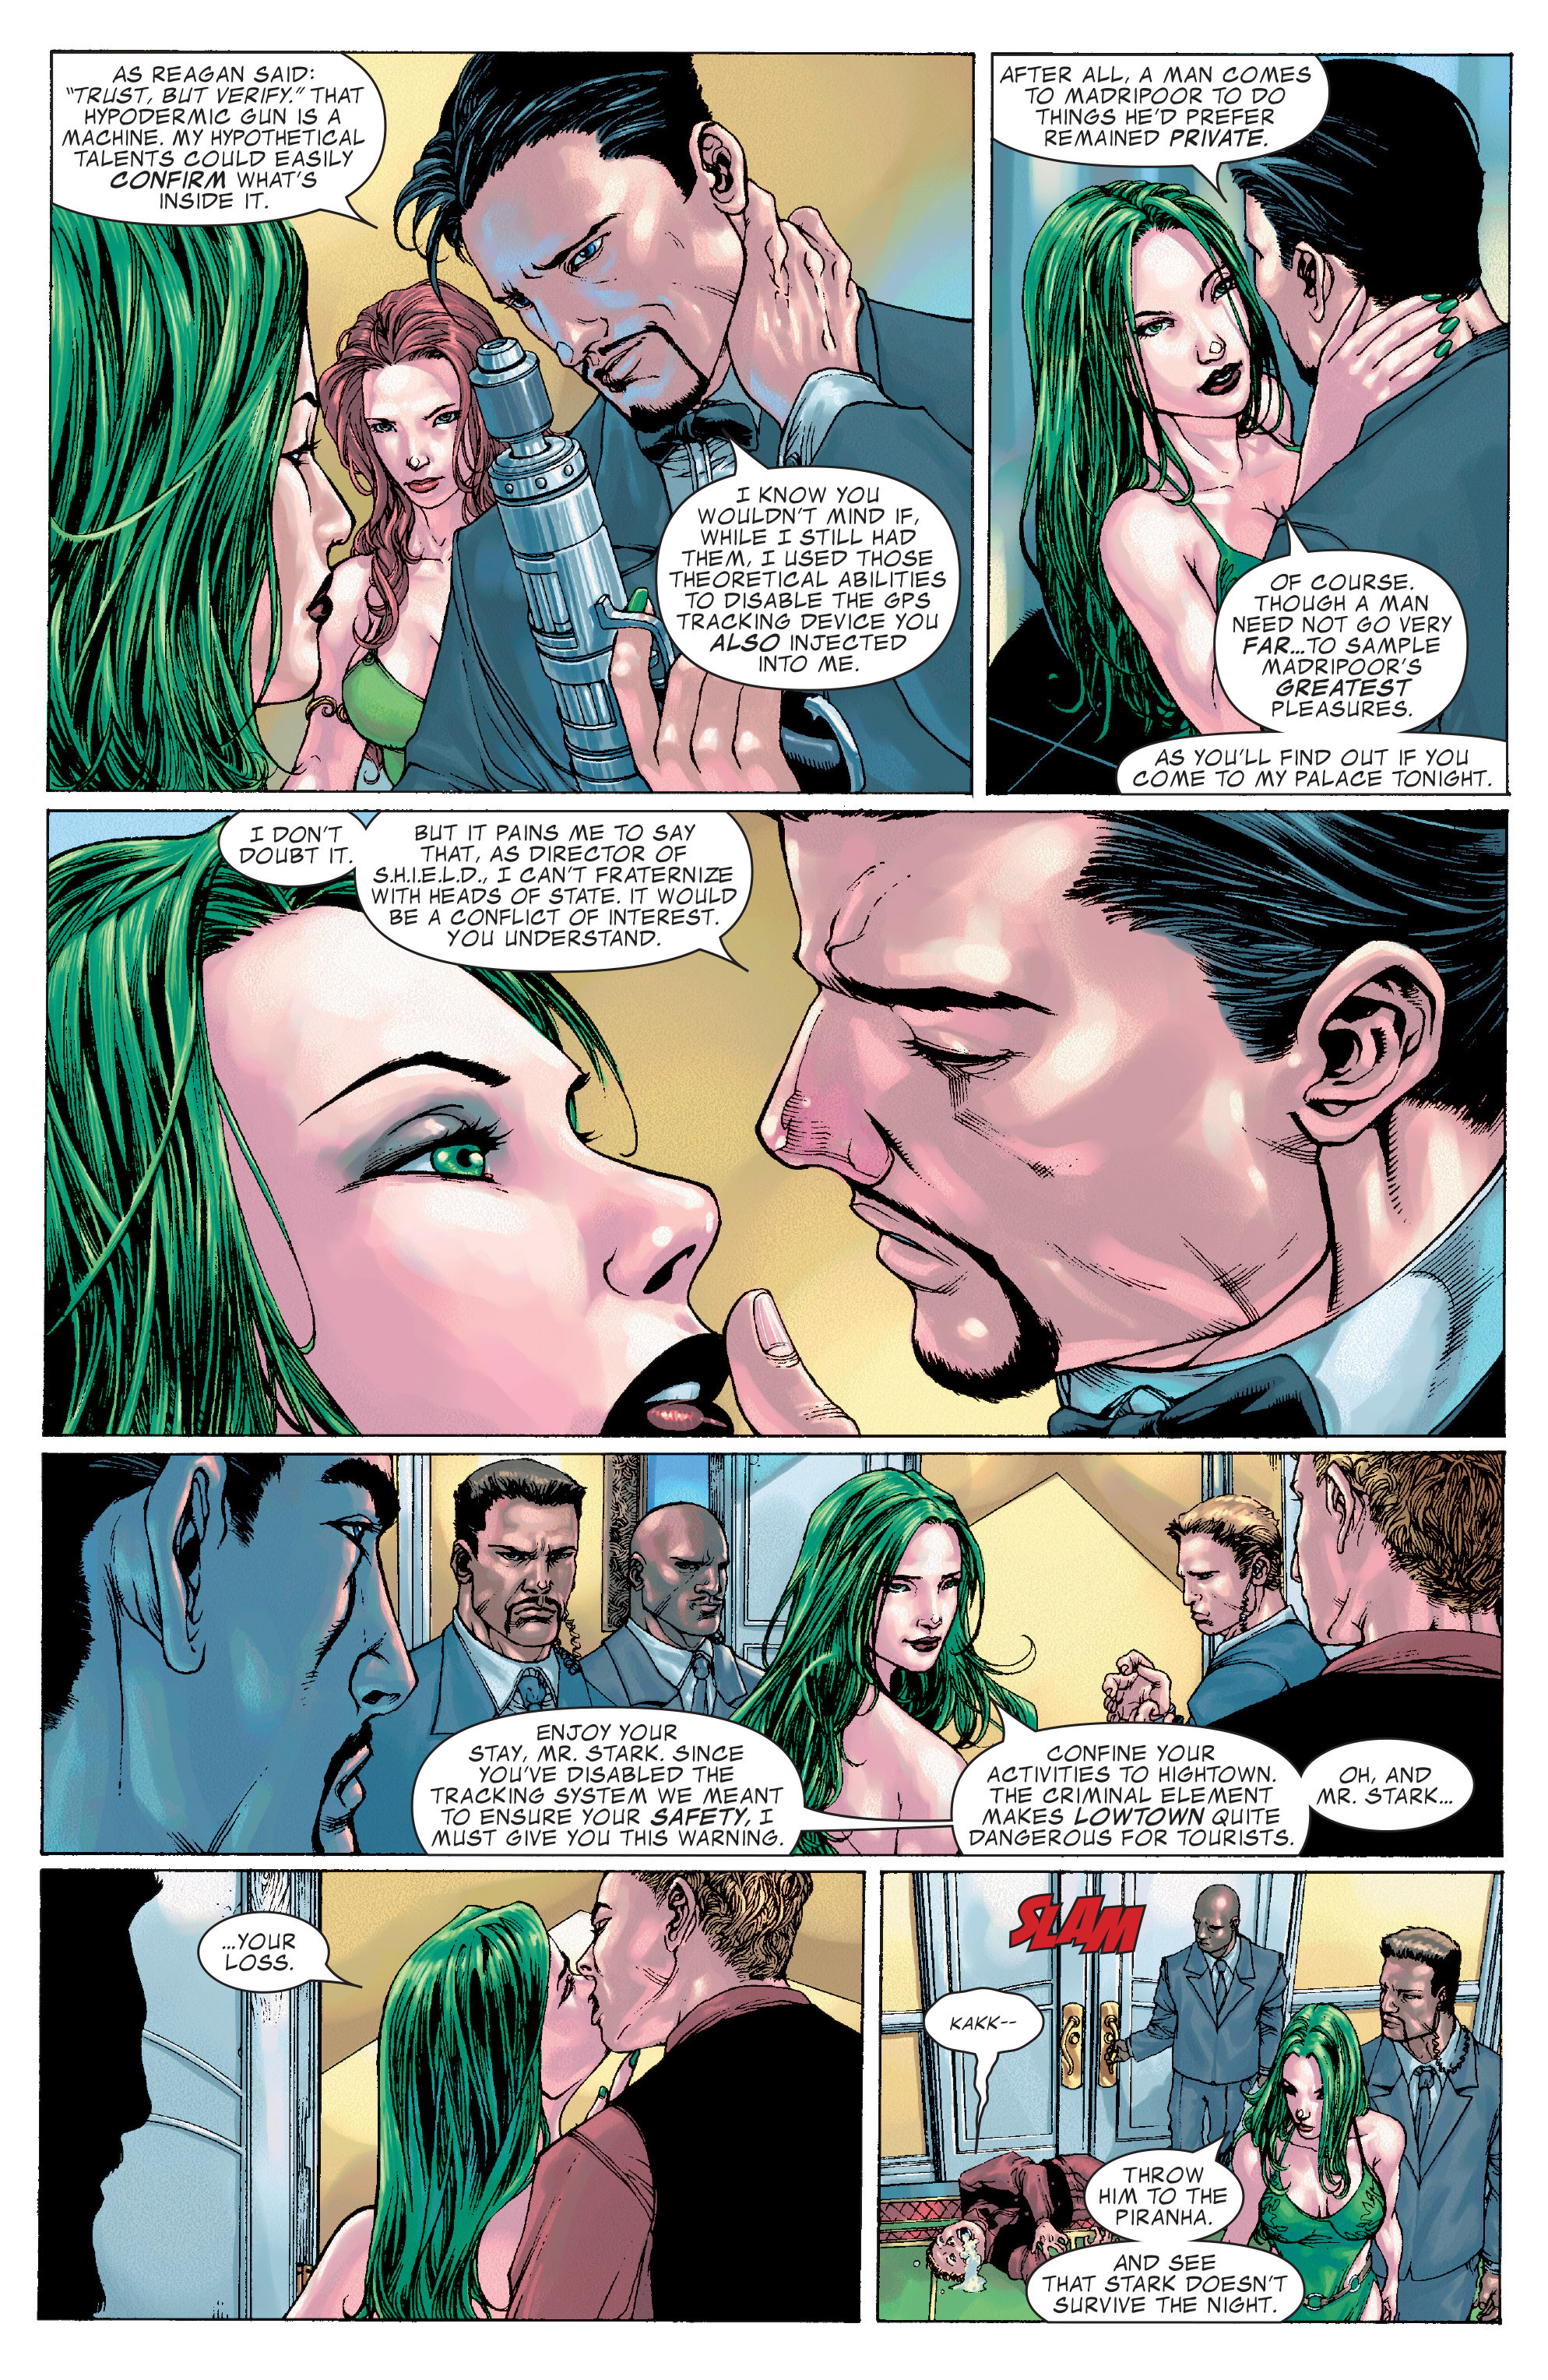 Iron Man: Director of S.H.I.E.L.D. Annual Full Page 10